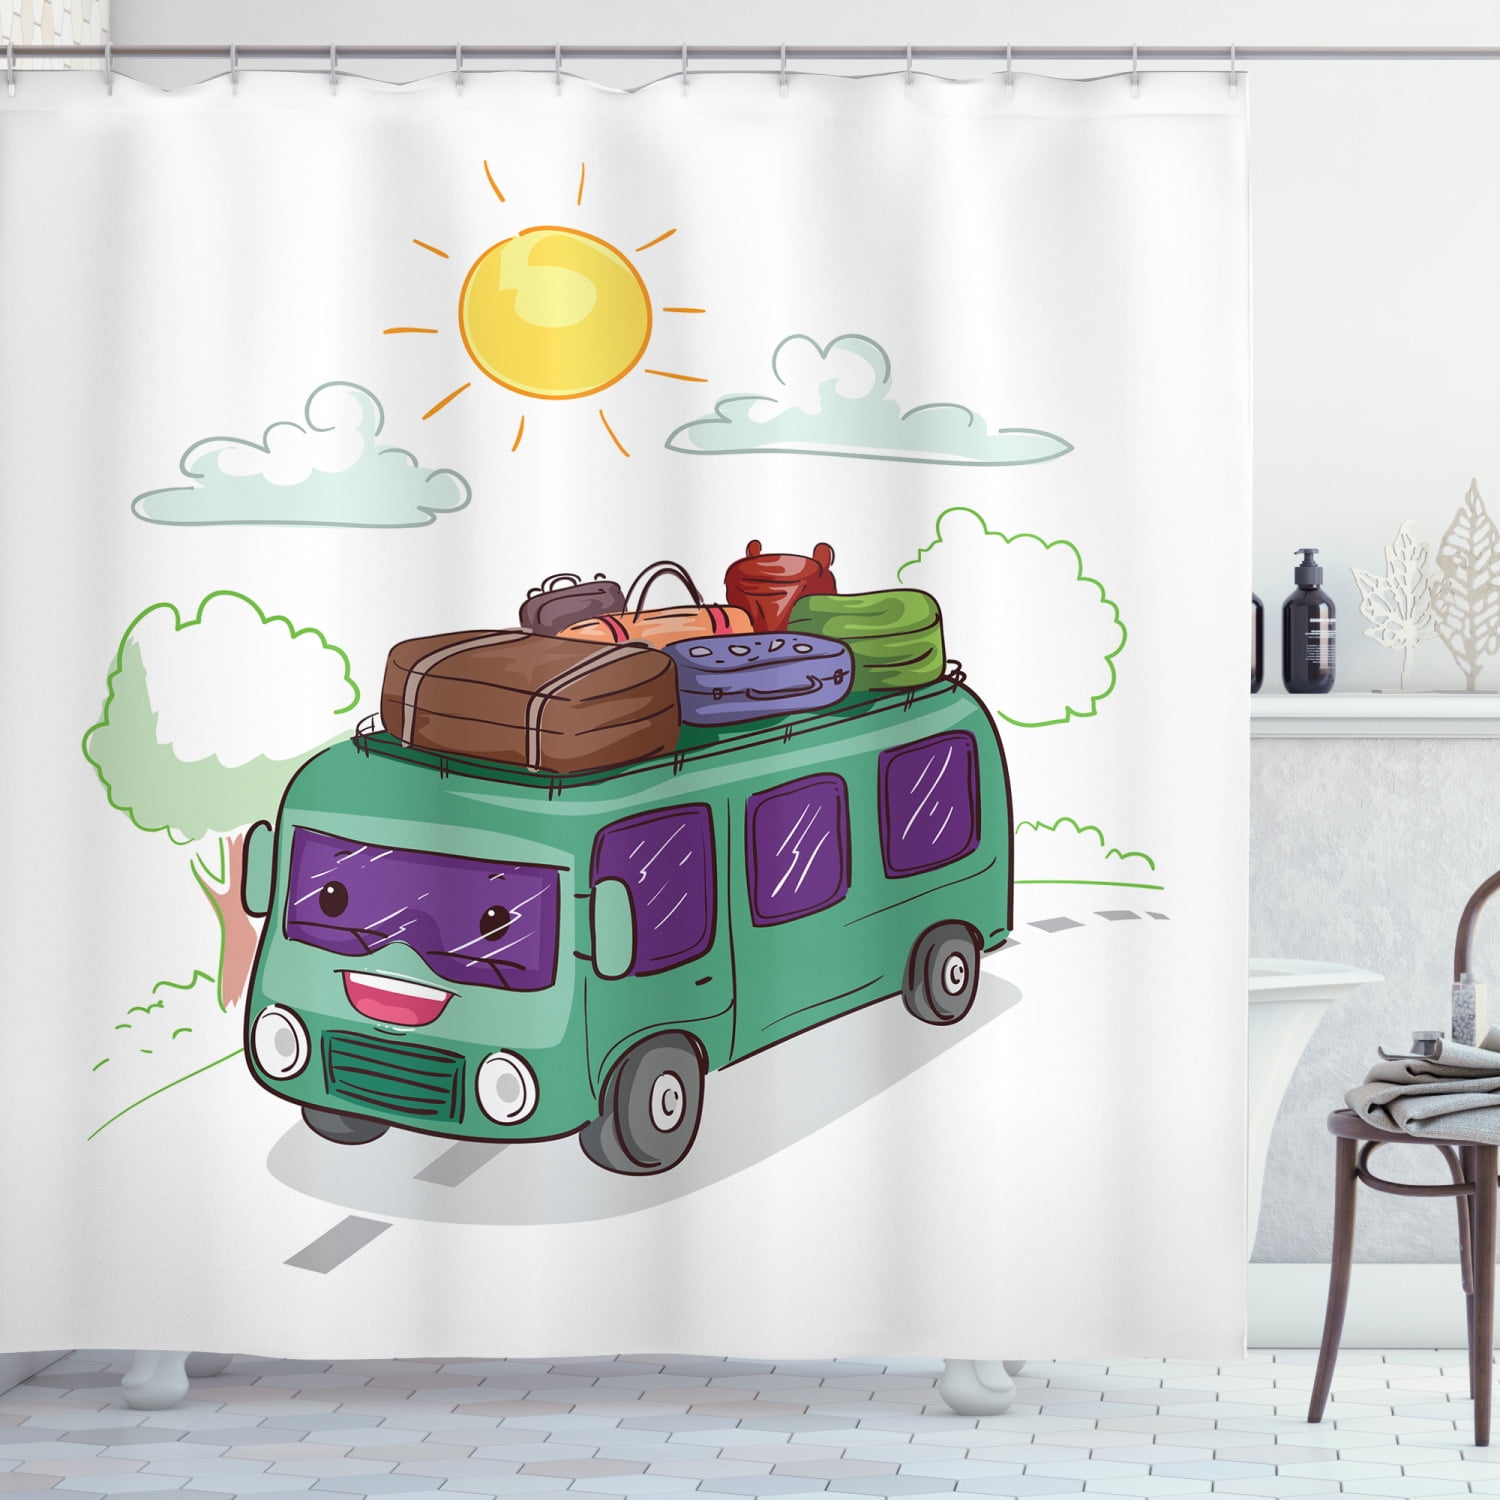 Camper Shower Curtain Bus Loaded With Luge Cruising In The Countryside Hippie Van Outdoor Activity Fabric Bathroom Set Hooks 69w X 84l Inches Extra Long Multicolor By Ambesonne Com